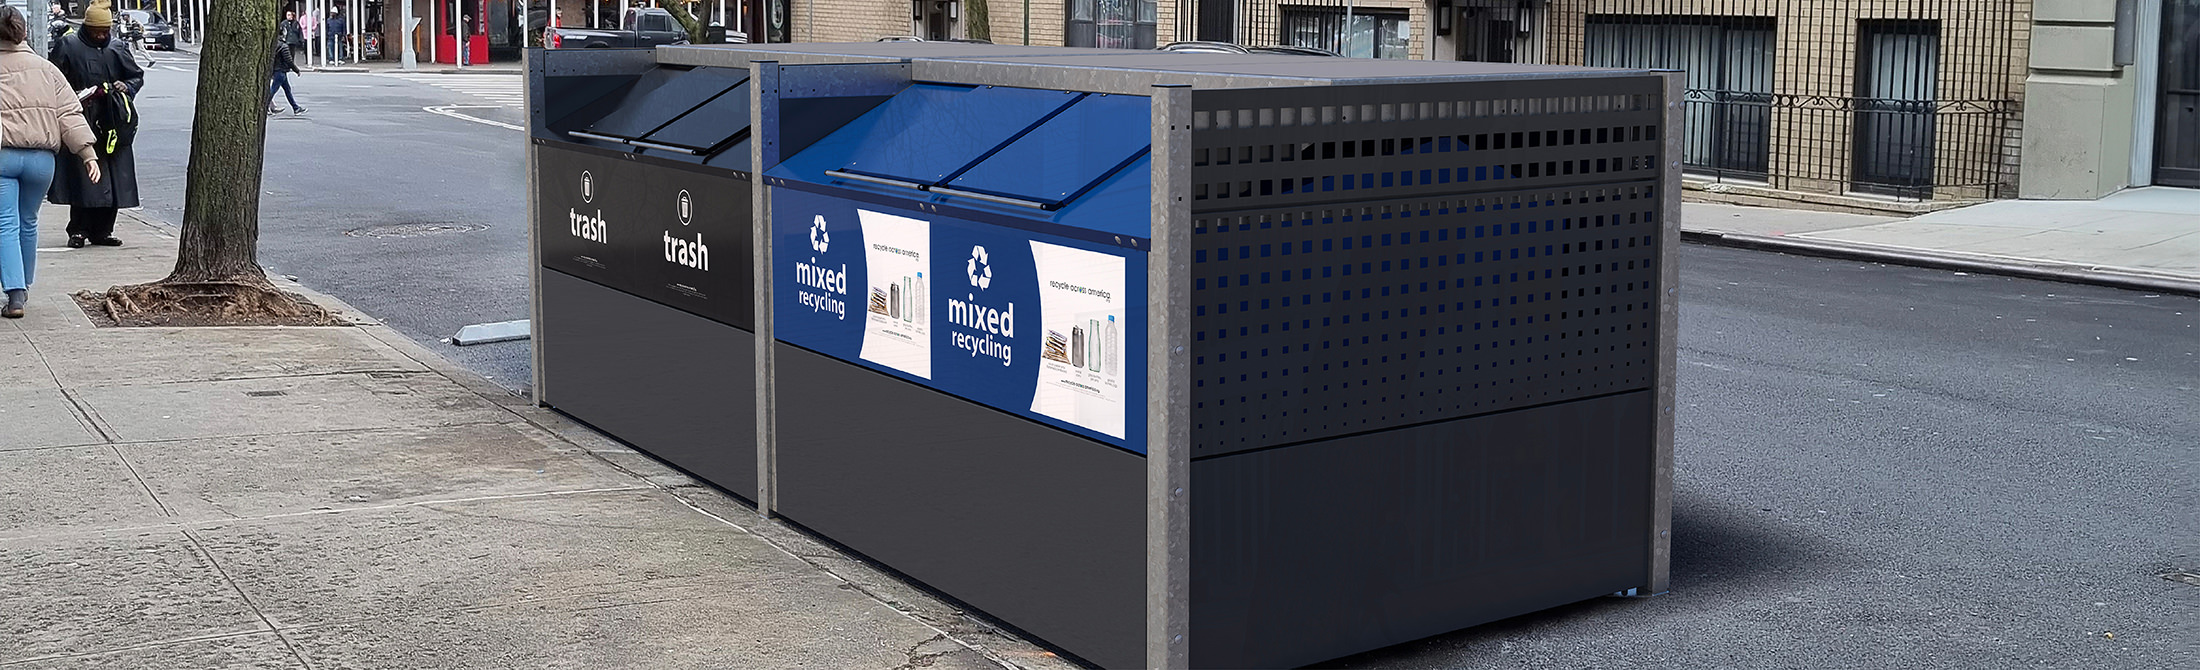 On-street recycling enclosure